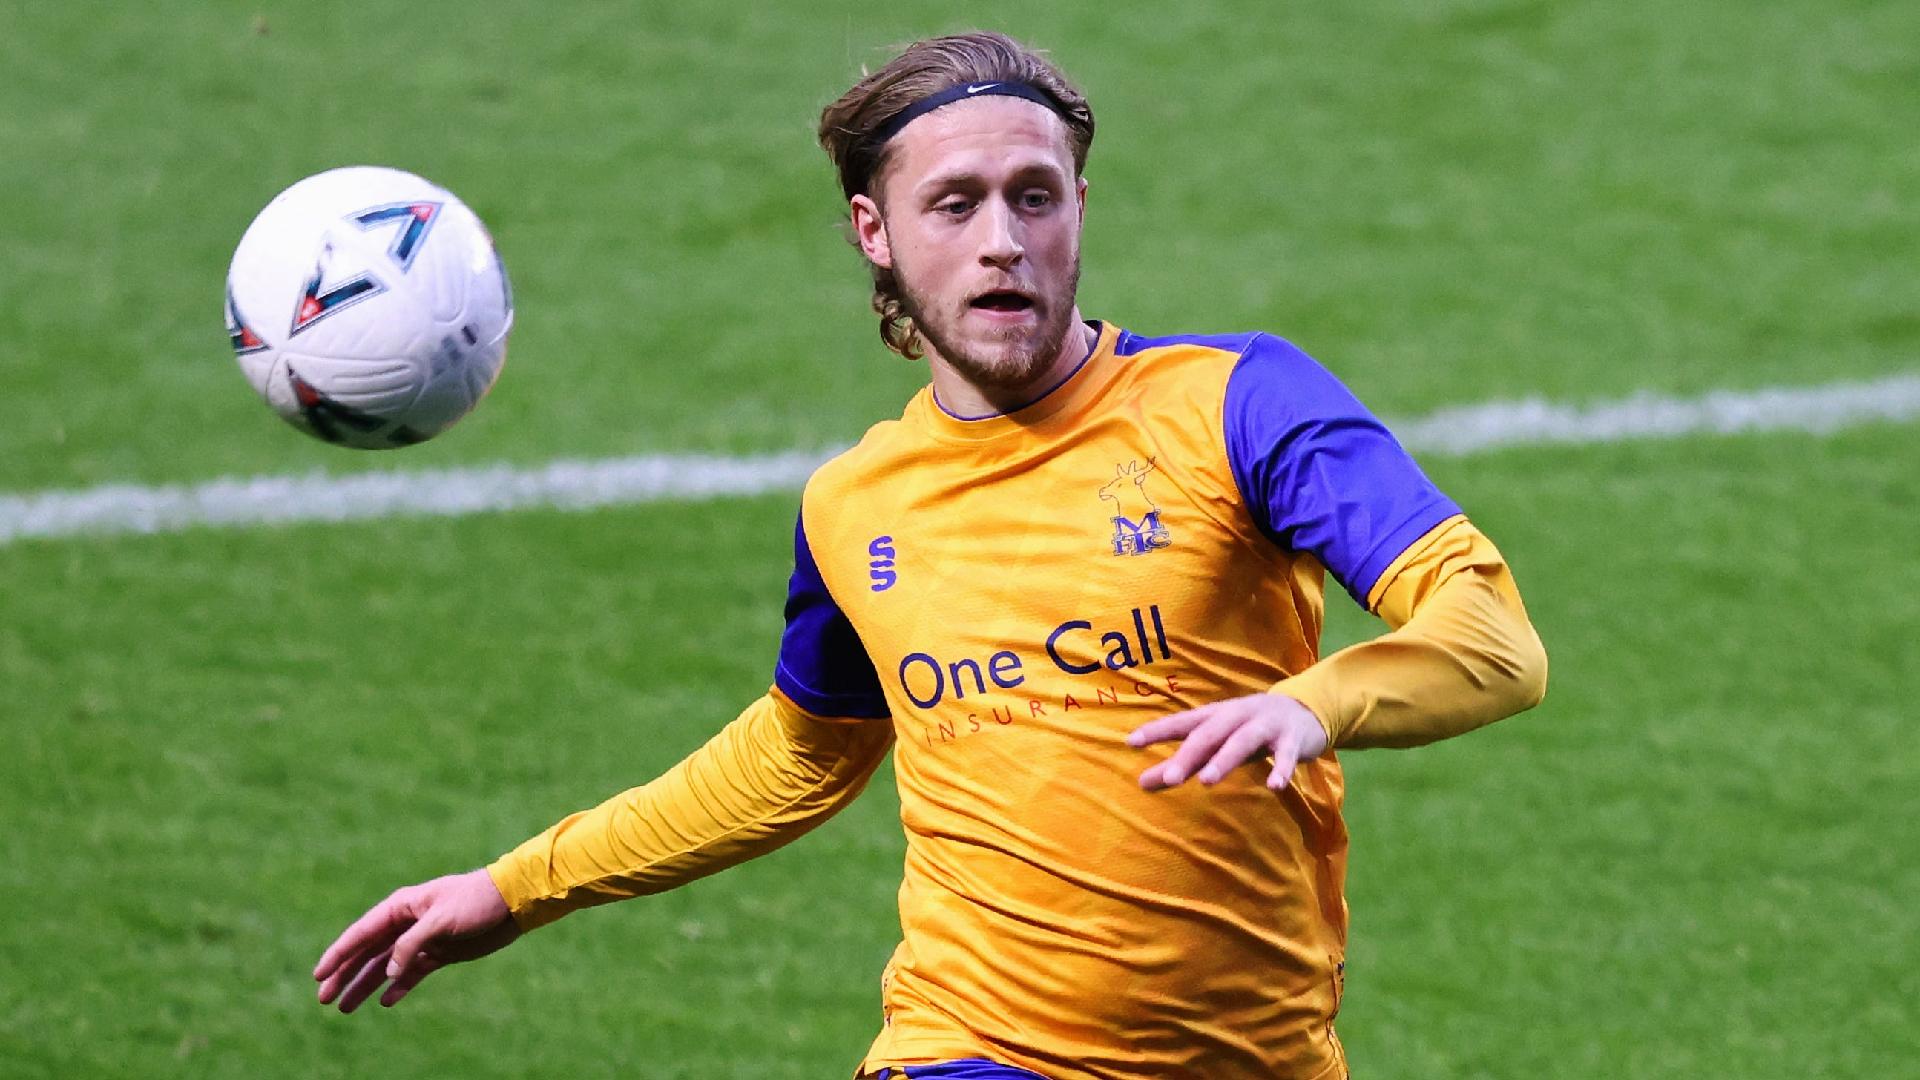 Mansfield bounce back from midweek loss to beat Swindon in five-goal thriller